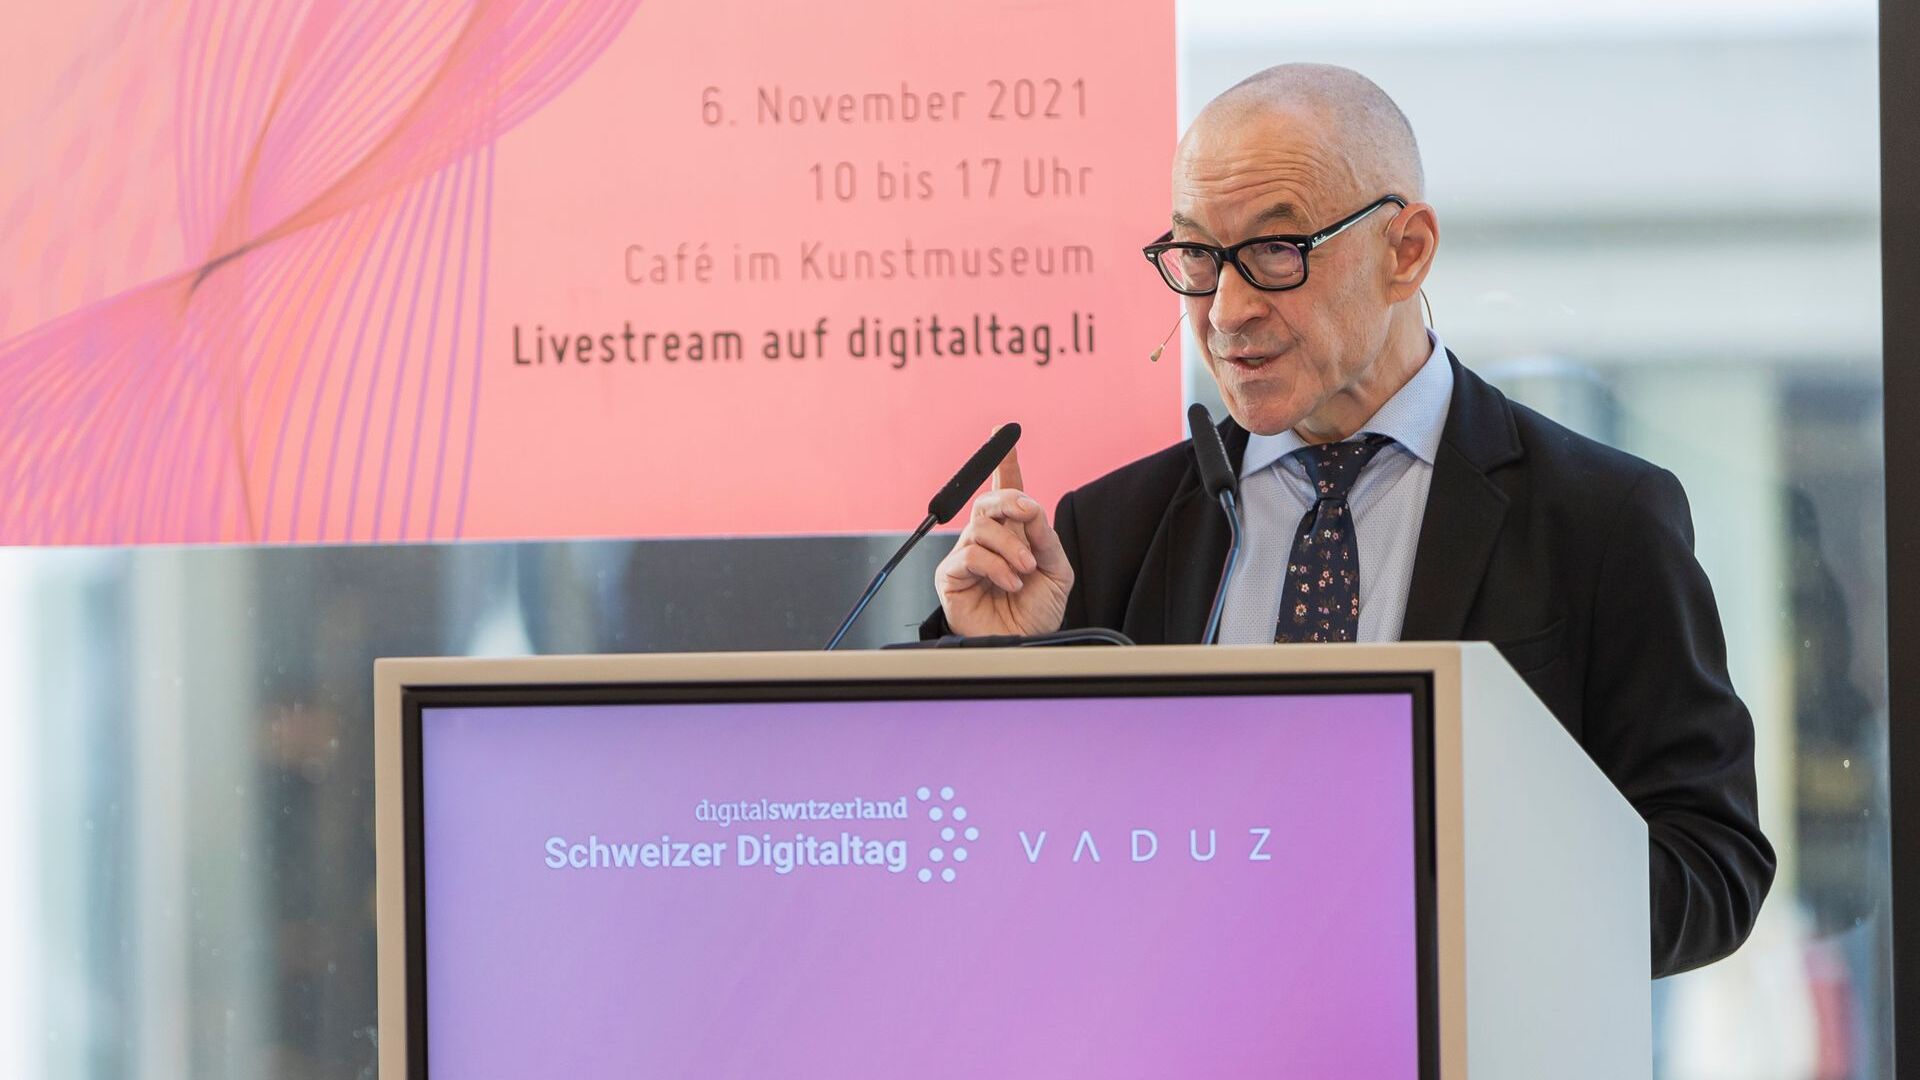 The "Digitaltag Vaduz", welcomed by the Kunstmuseum of the capital of the Principality of Liechtenstein on Saturday 6 November 2021, aroused the enthusiasm of the public and speakers in analogy with the "Swiss Digital Day" of the following day 10: the intervention of the futurist and expert of German trends David Bosshart